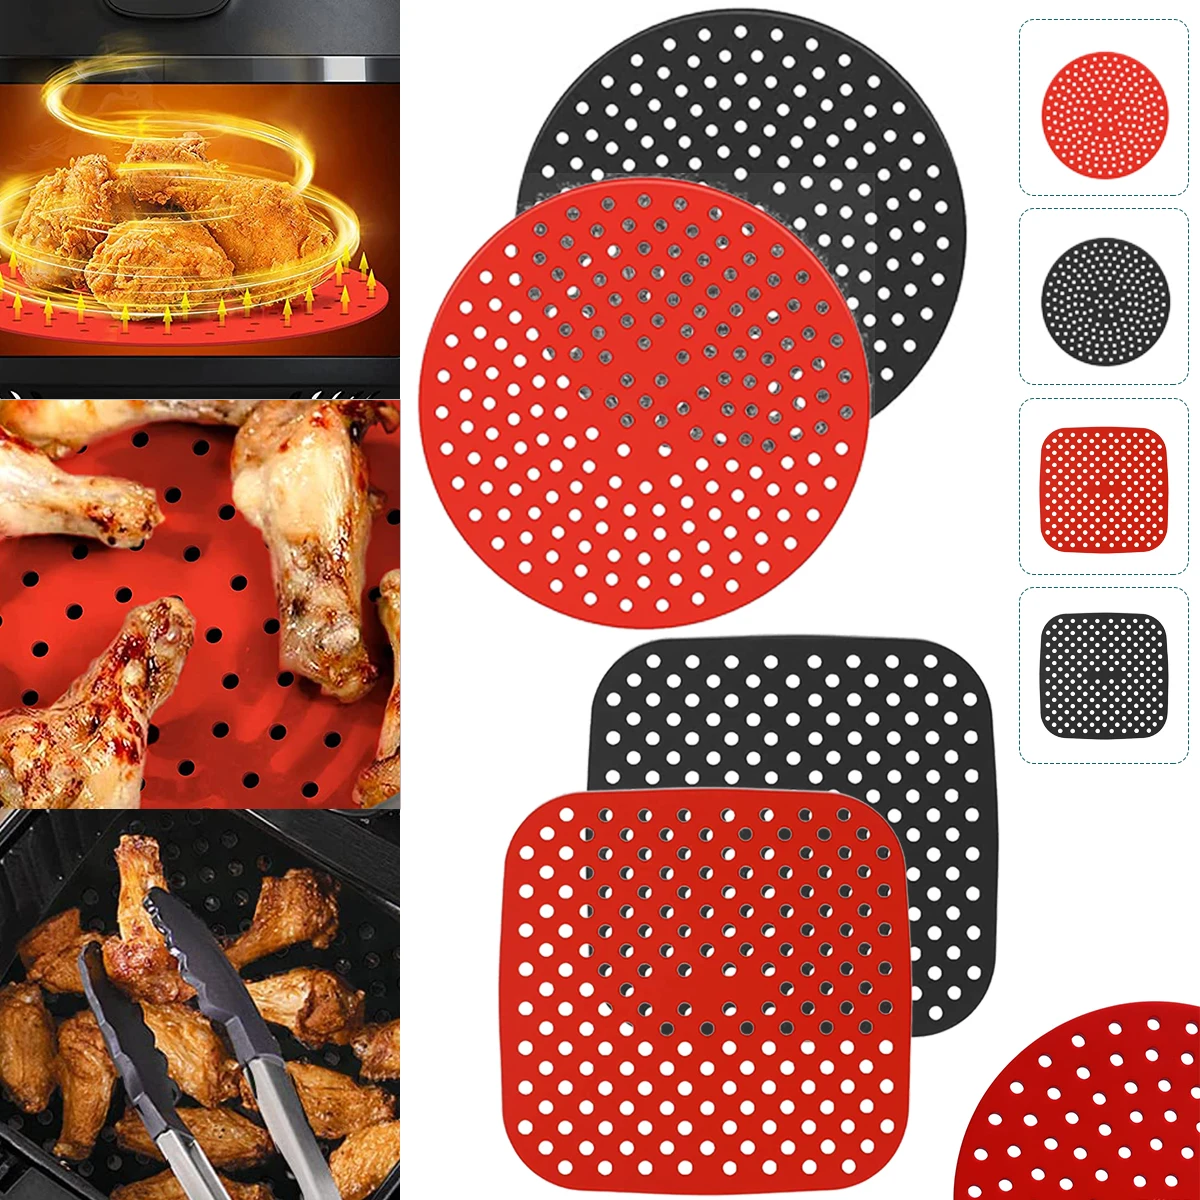 Air Fryer Lined Silicone Pad 7.5/8/8.5/9 Inch Square Round Heat-Resistant Non-slip Reusable Pot Mat Kitchen Accessories Gadgets